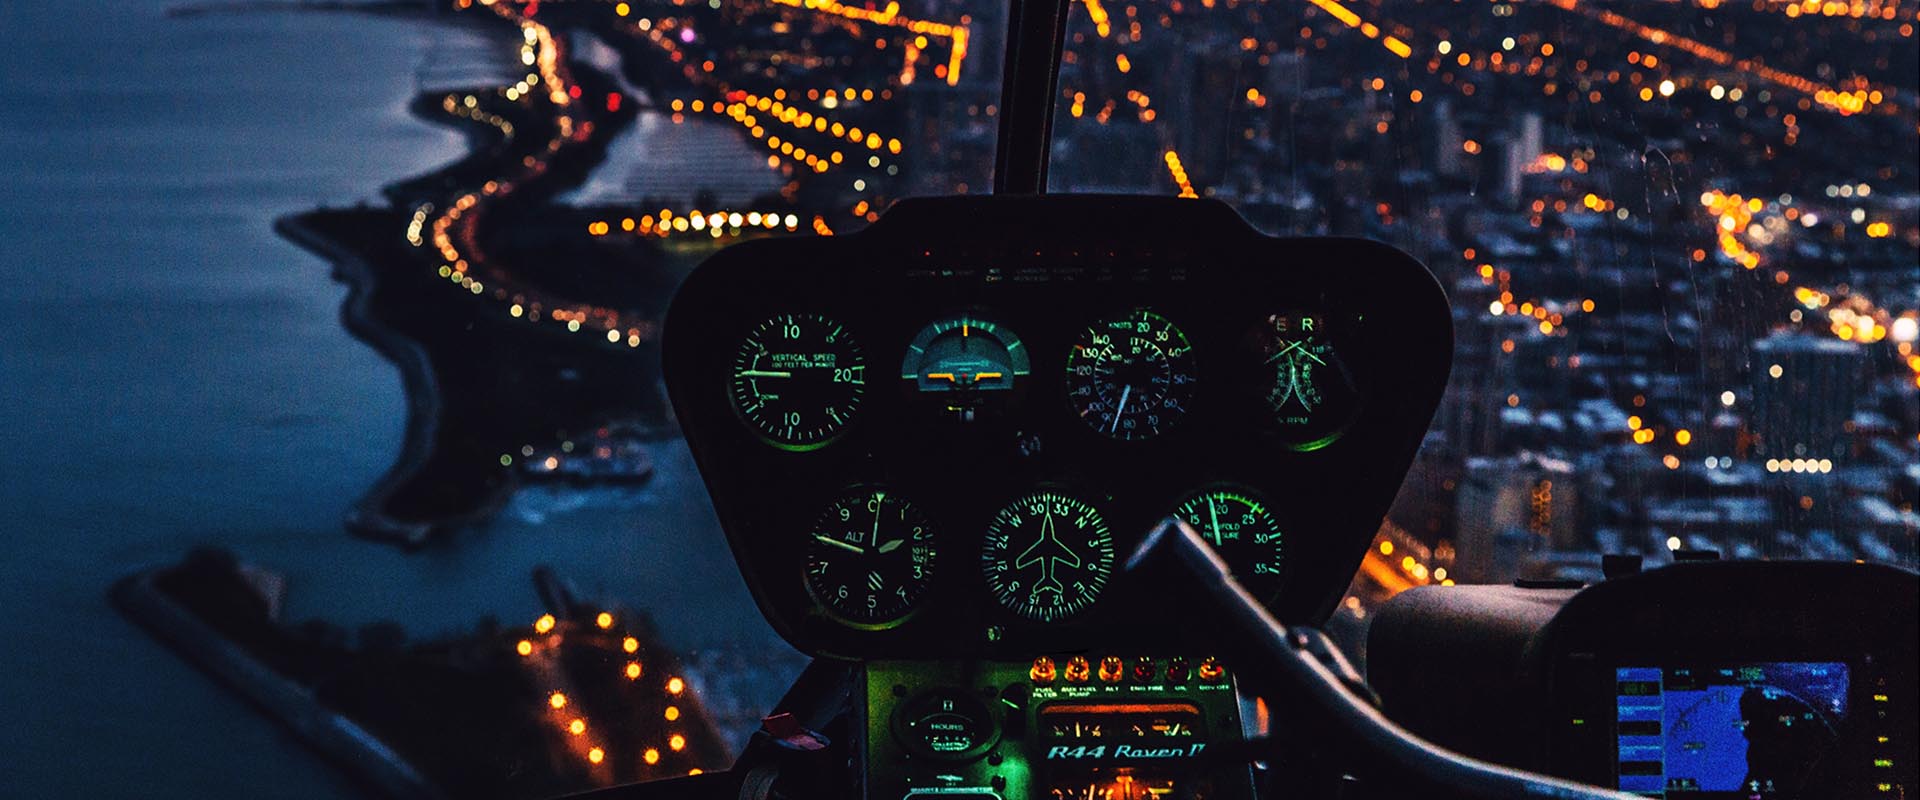 light-skyline-night-city-skyscraper-fly-cityscape-aircraft-dusk-evening-reflection-flight-helicopter-control-screenshot-aerial-photography-atmosphere-of-earth-1329333-copie.jpg